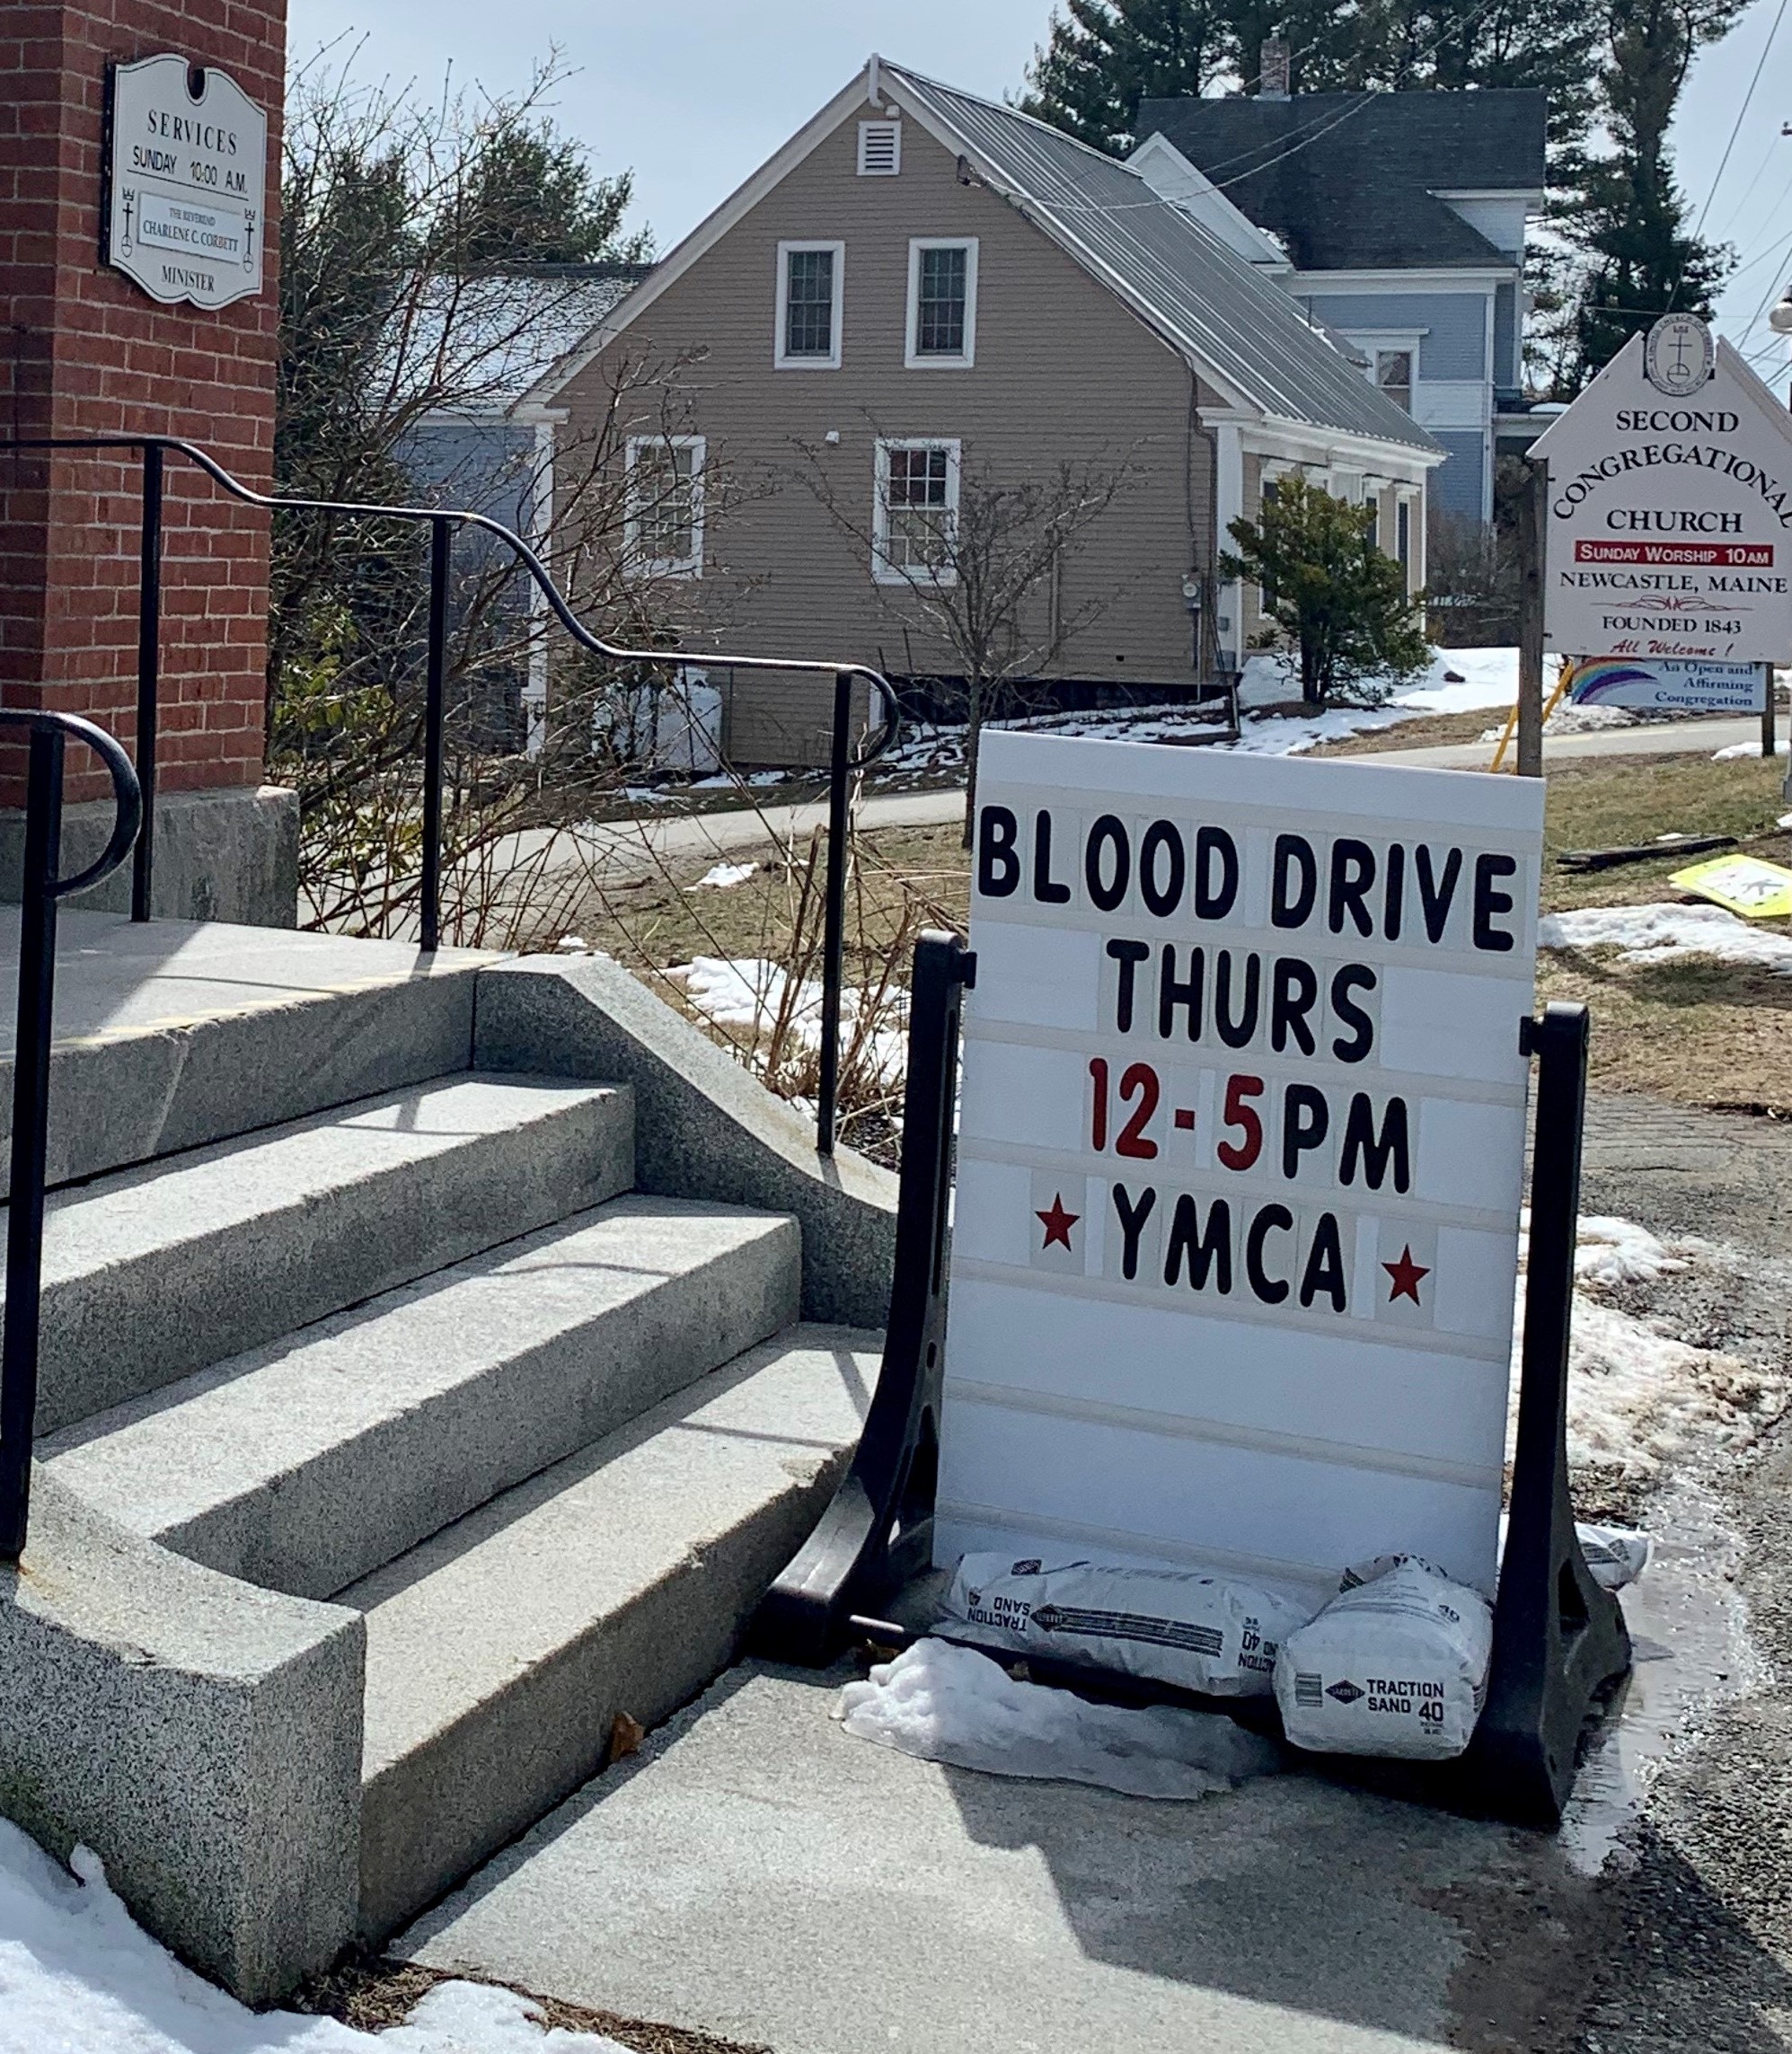 Blood drive sign, Newcastle, Maine, 3/25/20